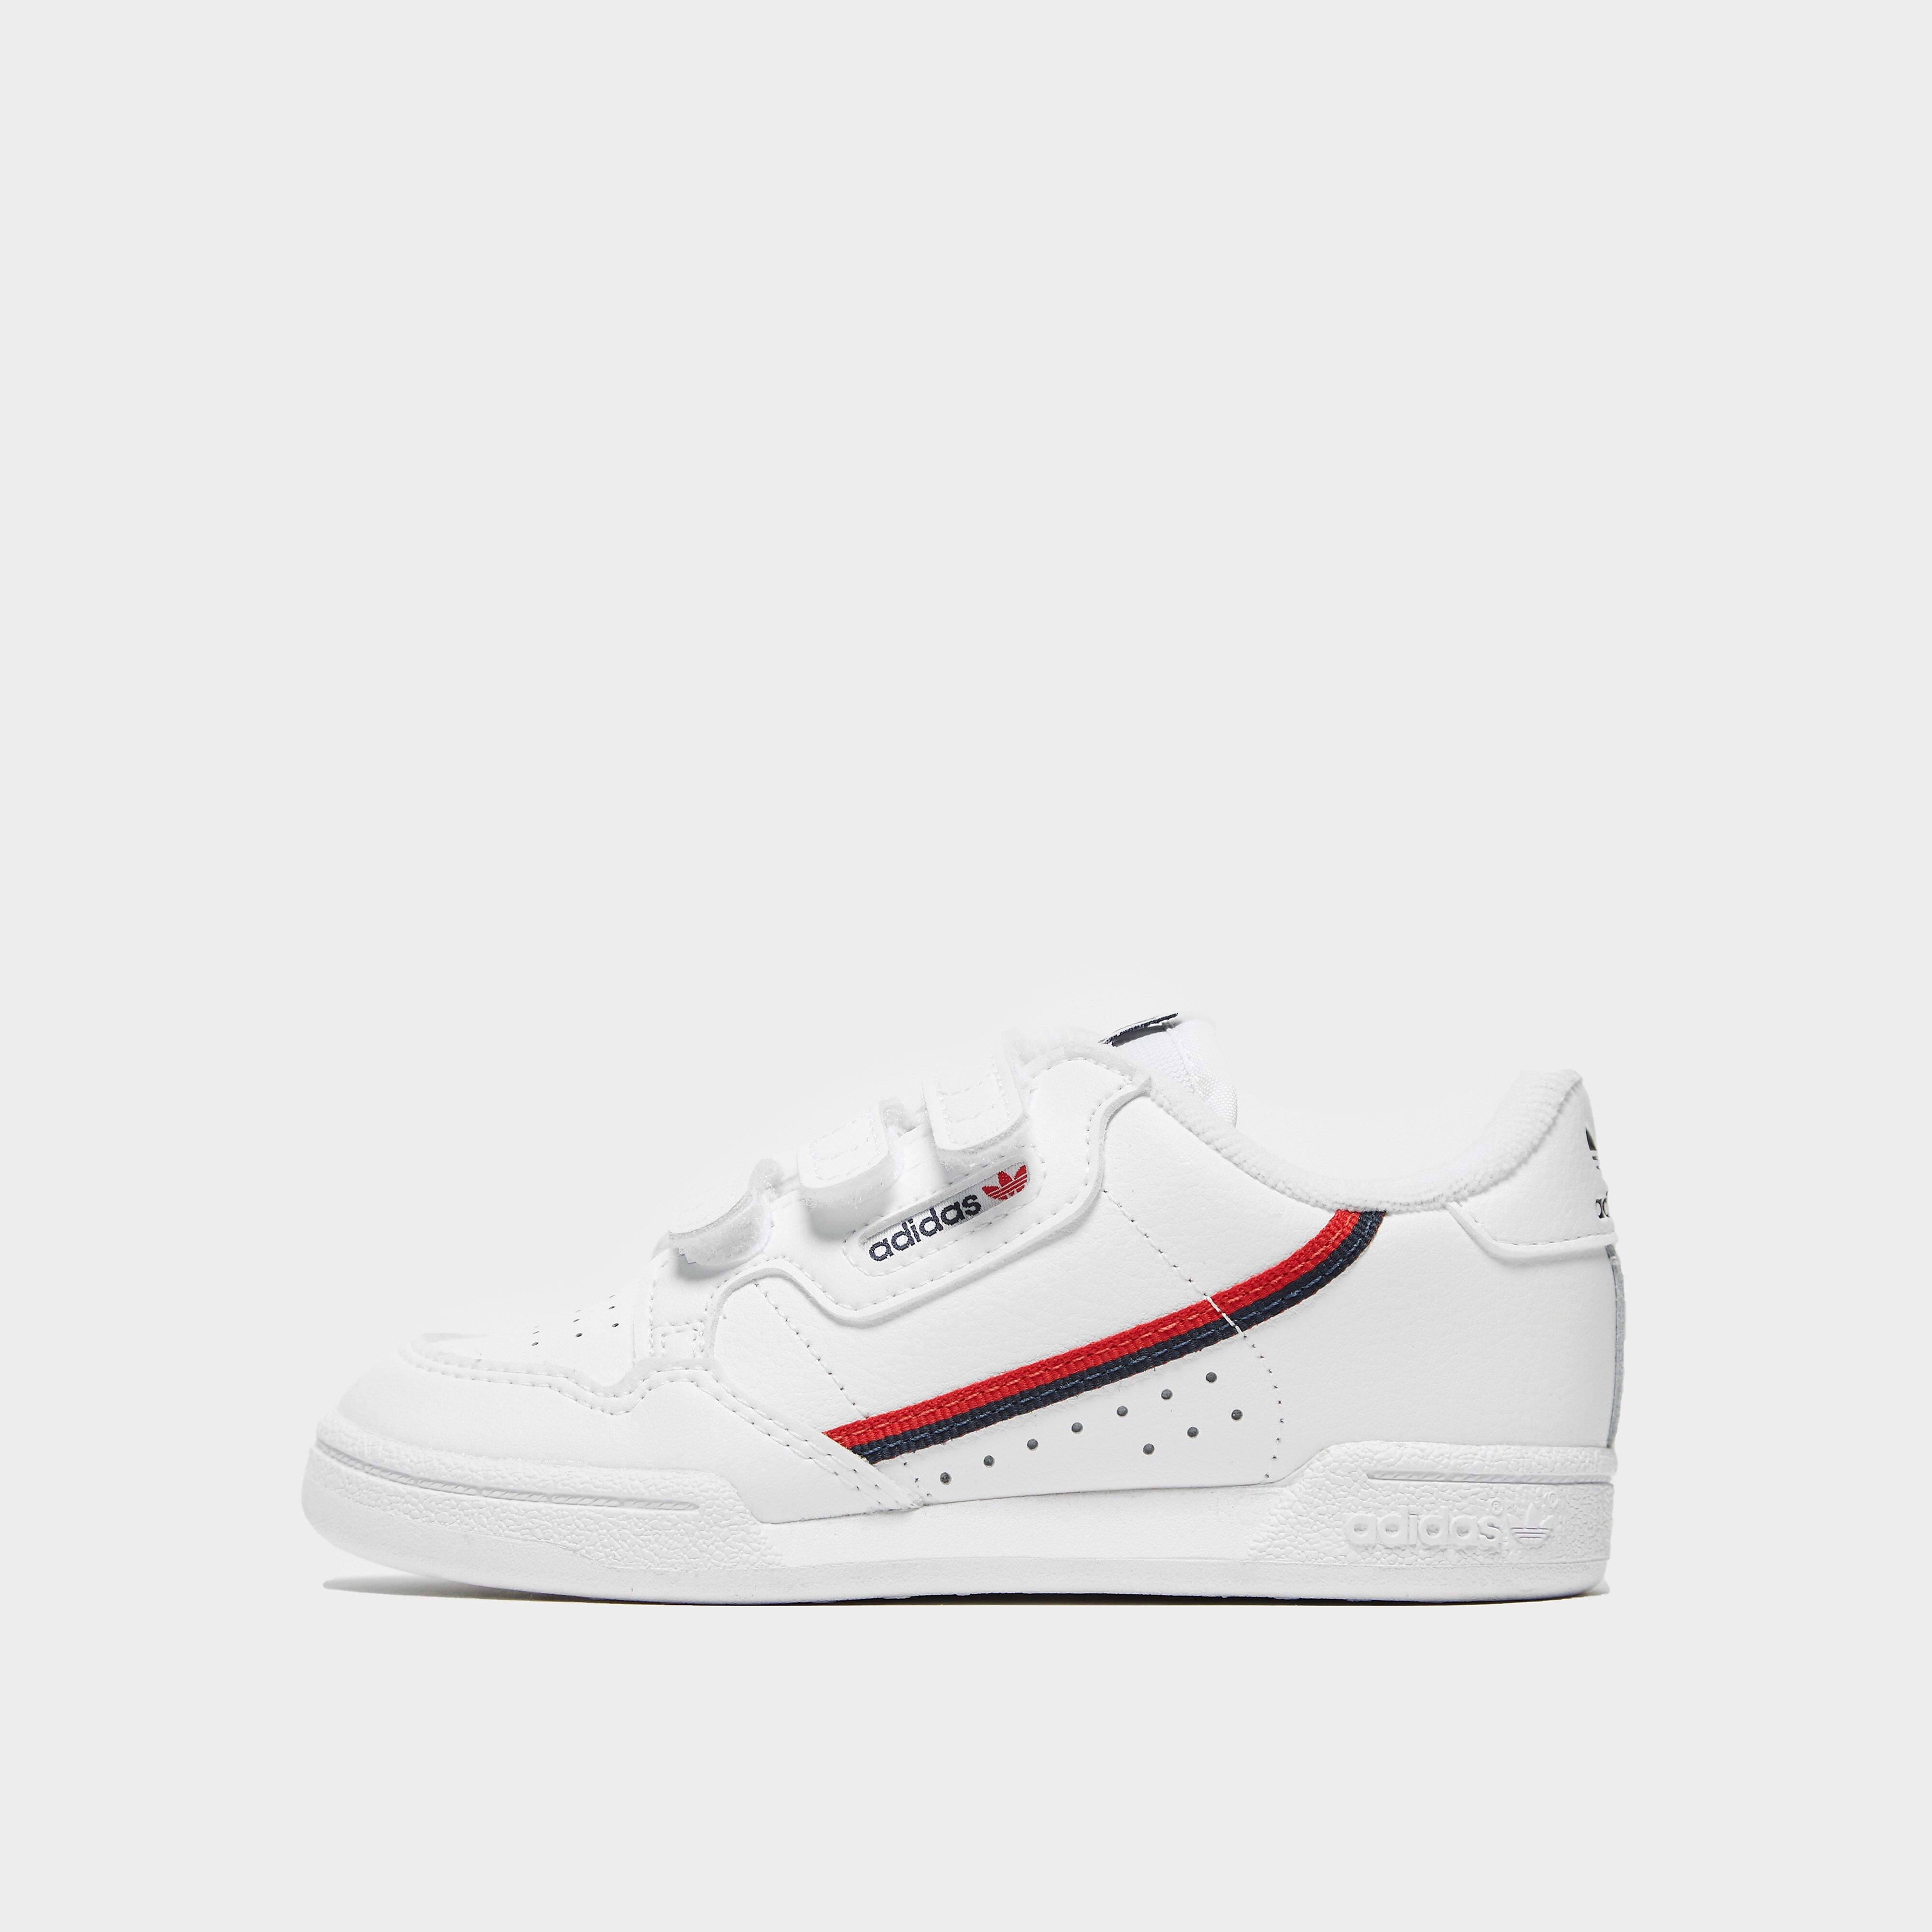 adidas Originals Continental 80 Infant's - White/Blue/Red  size: 7